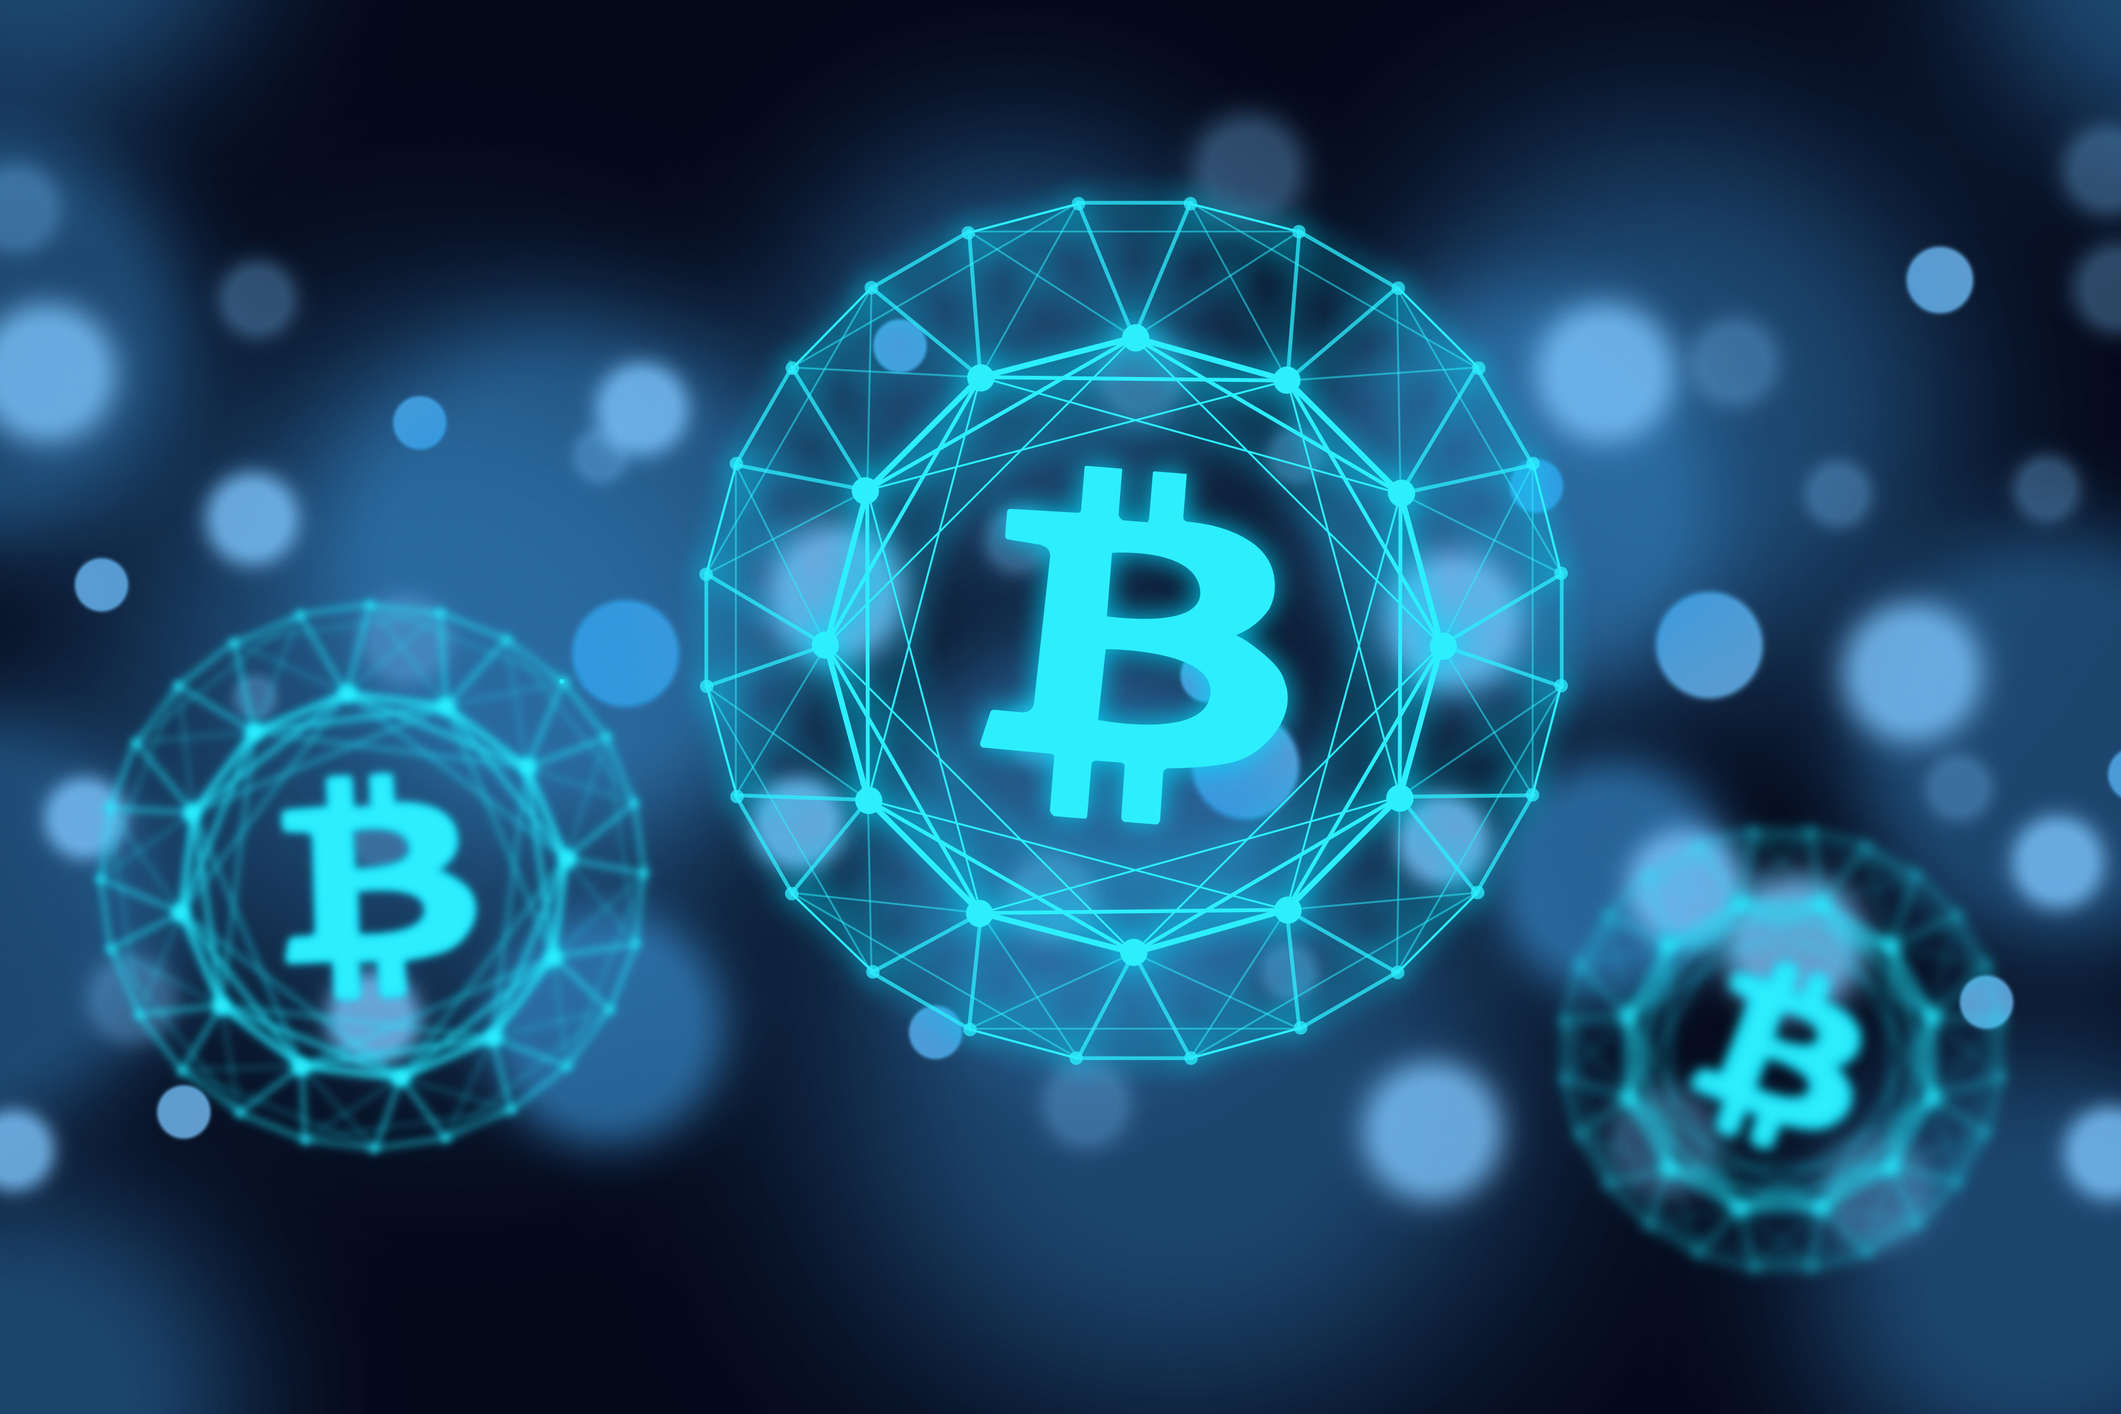 Picture of bitcoin logos in light blue bubbles